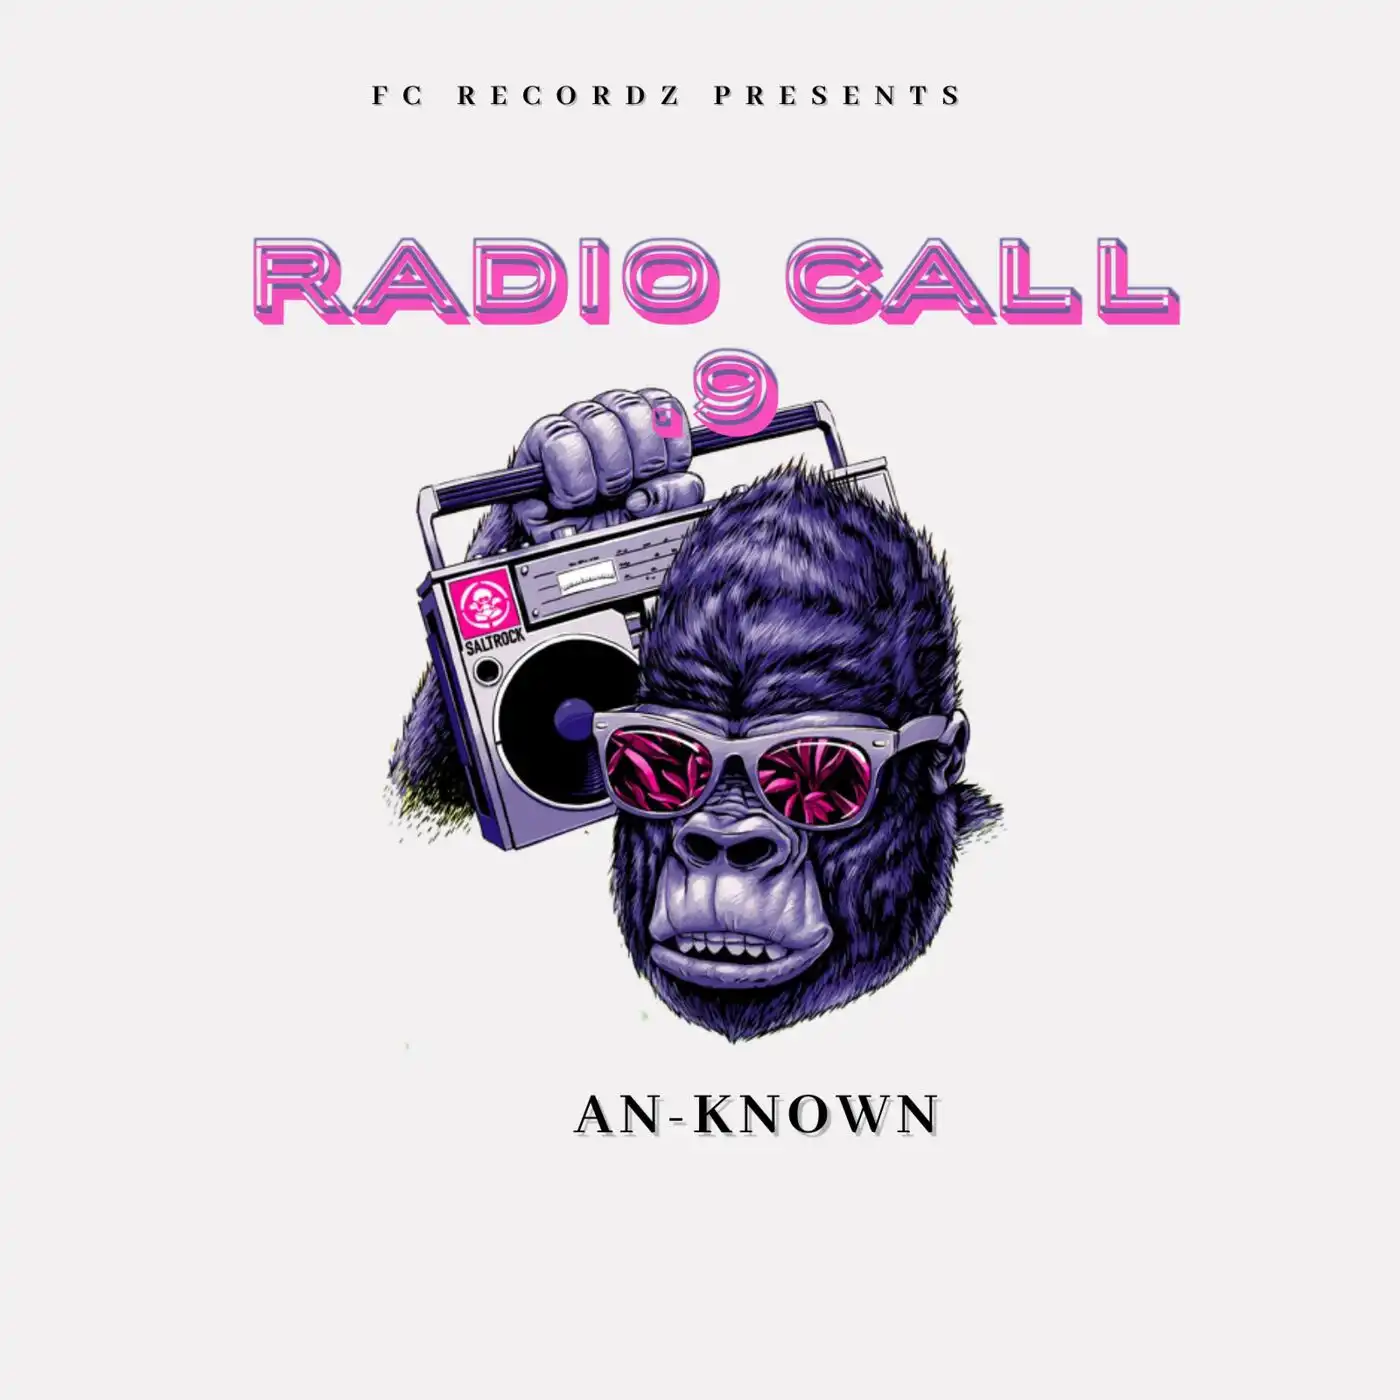 an-known-radio-call-9-album-cover